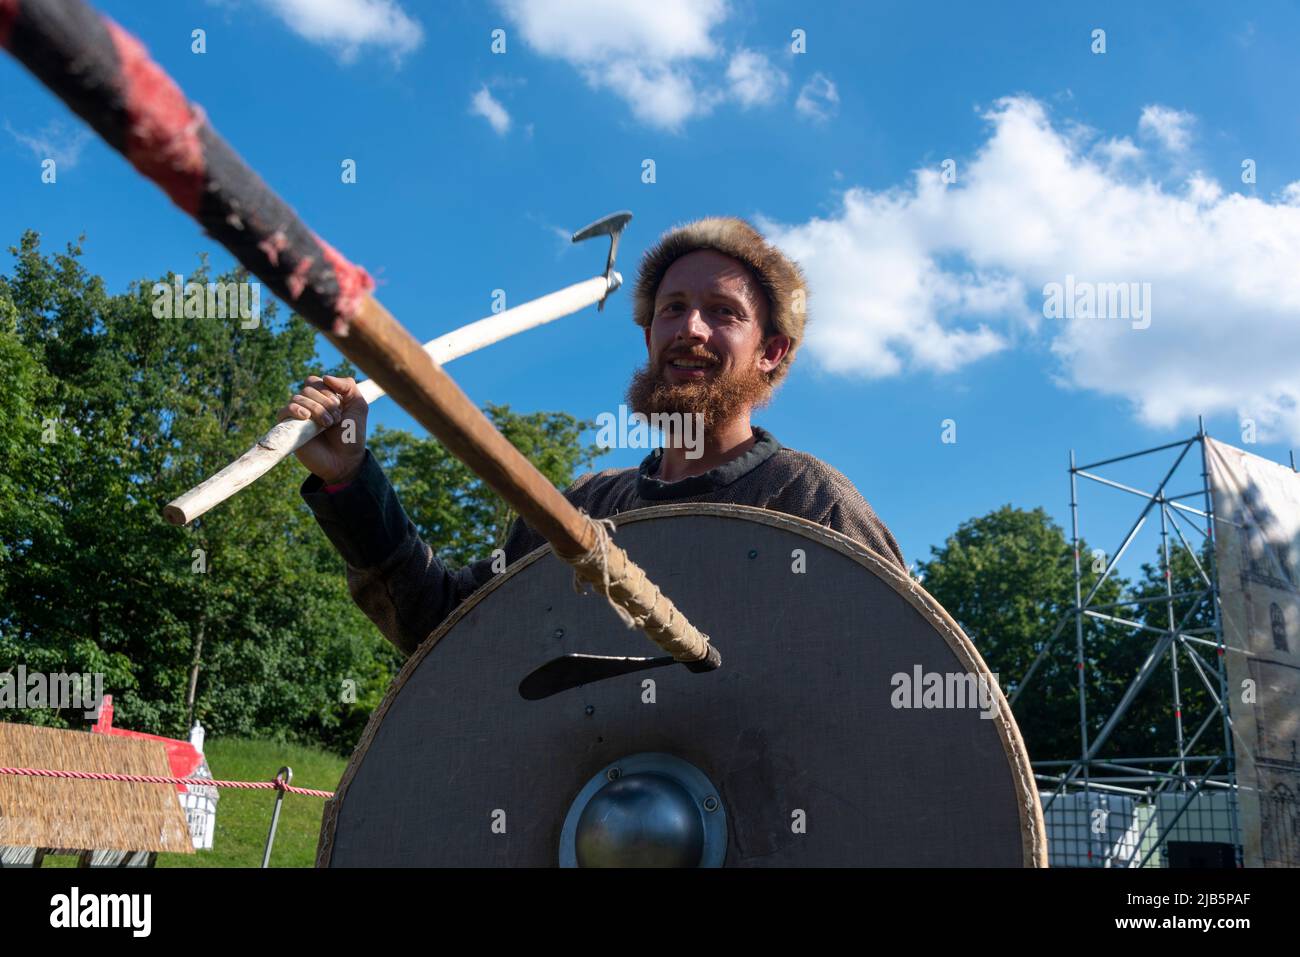 PRODUCTION - 02 June 2022, Saxony-Anhalt, Magdeburg: Philipp Rücker holds a West Slavic bar axe at the medieval festival Spectaculum Magdeburgense in Glacis Park. After the opening of the festival 'Spectaculum Magdeburgense' and the Magdeburg Fortress Days on Thursday, performances by fire artists, acrobats, craftsmen and merchants in a historical ambience are on the program until Whit Monday. In areas specially designed for the festivities, visitors will travel back in time - from the Middle Ages to the imperial era. The venues are the Glacis Park and the fortress complex 'Ravelin 2'.t. Photo Stock Photo